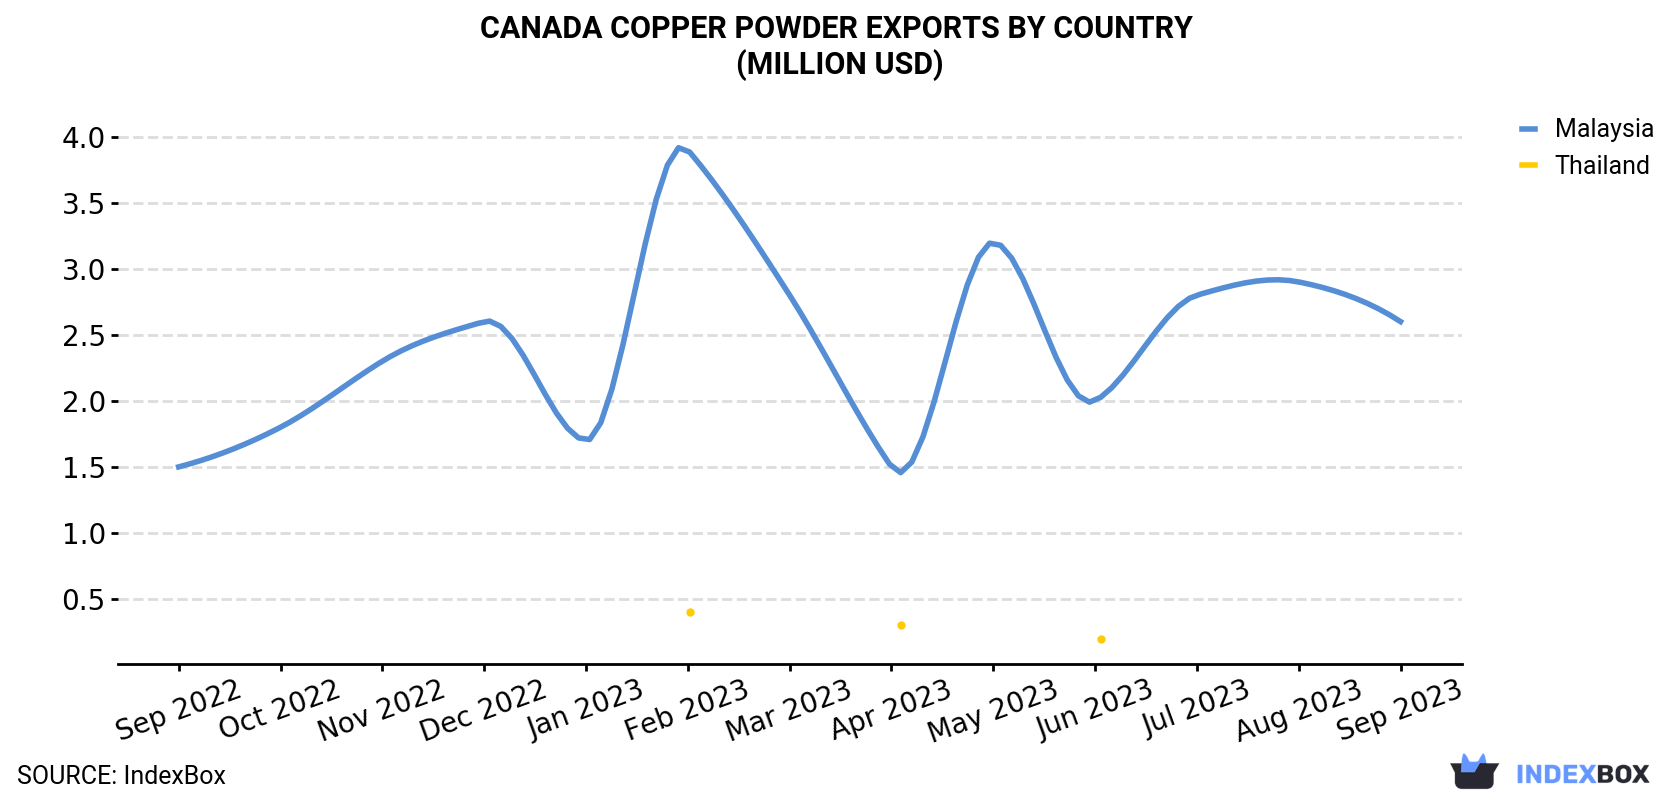 Canada Copper Powder Exports By Country (Million USD)